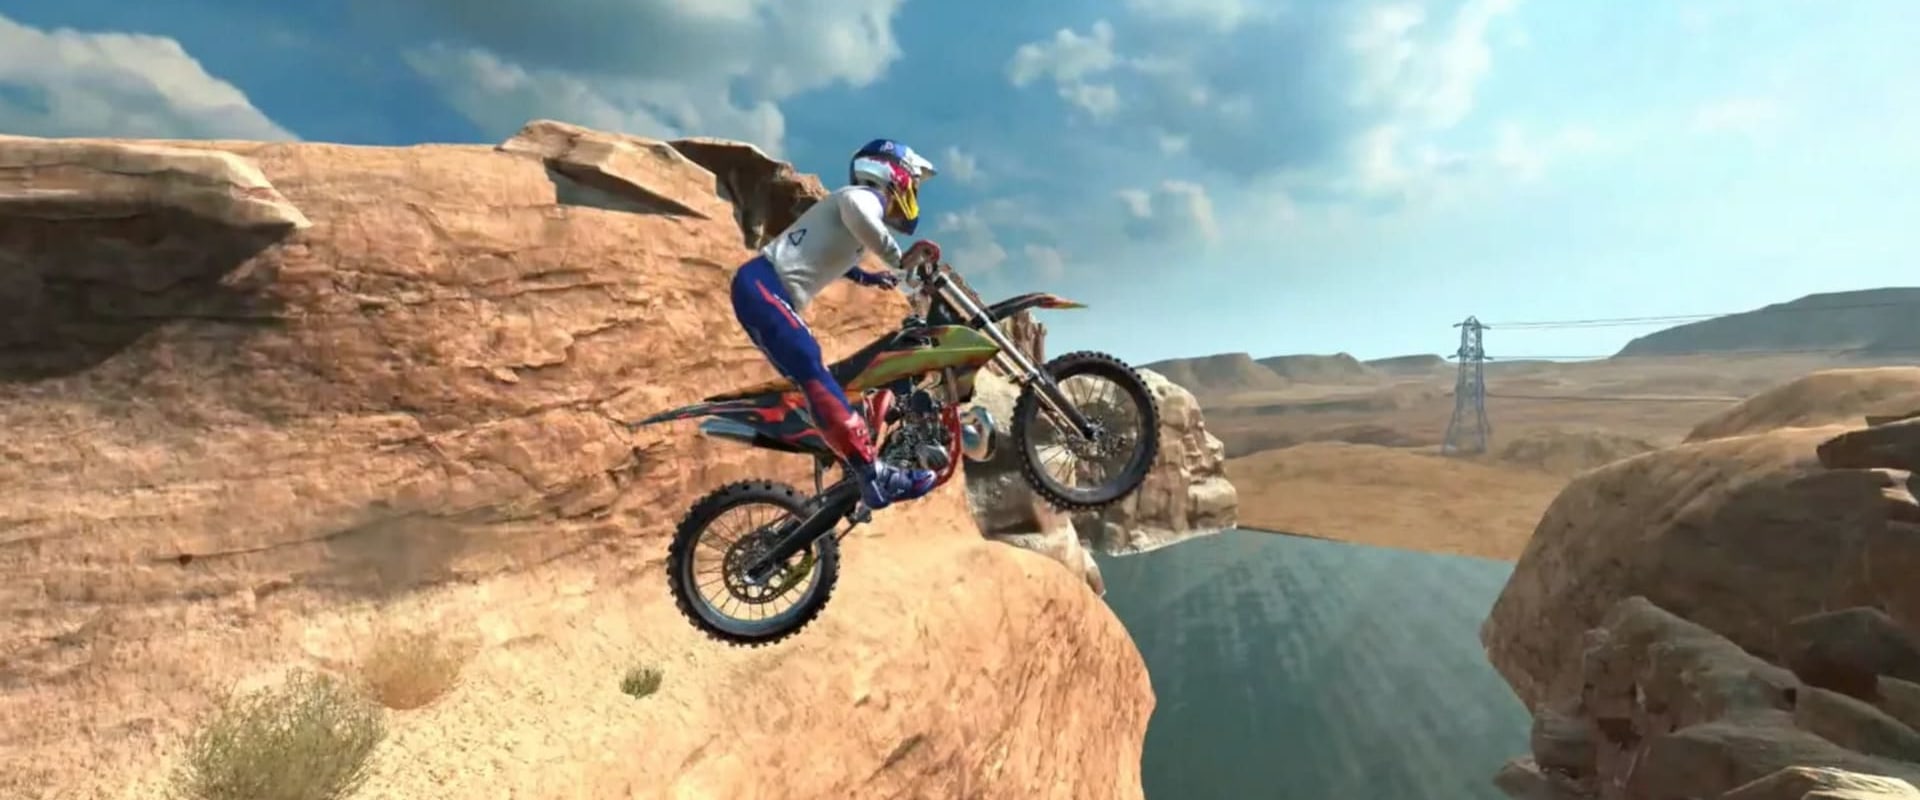 Reviews of PC Motocross Games